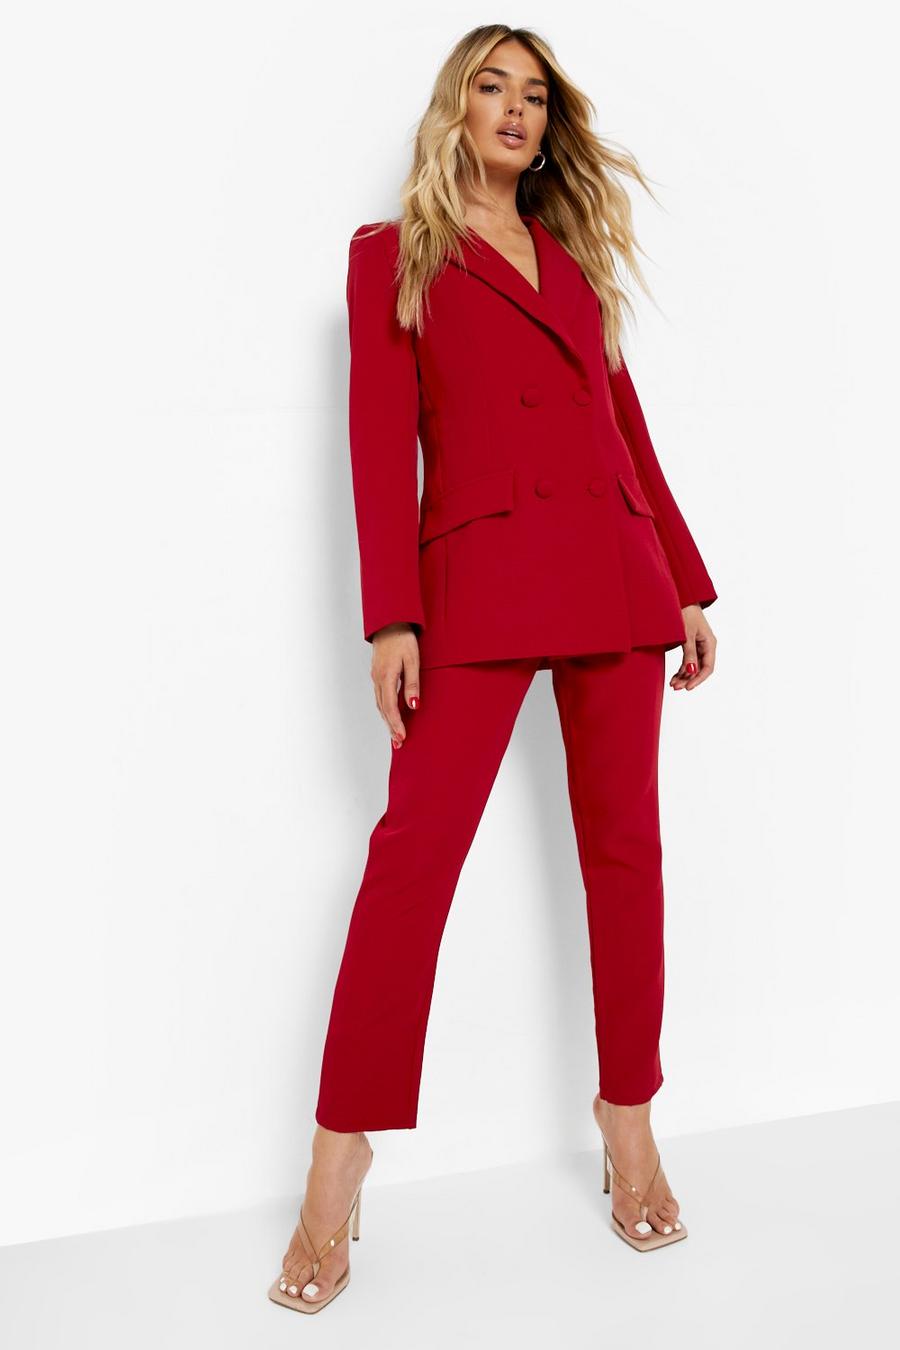 Special Occasion Pant Suits, Ladies Pant Suits for Special Occasions